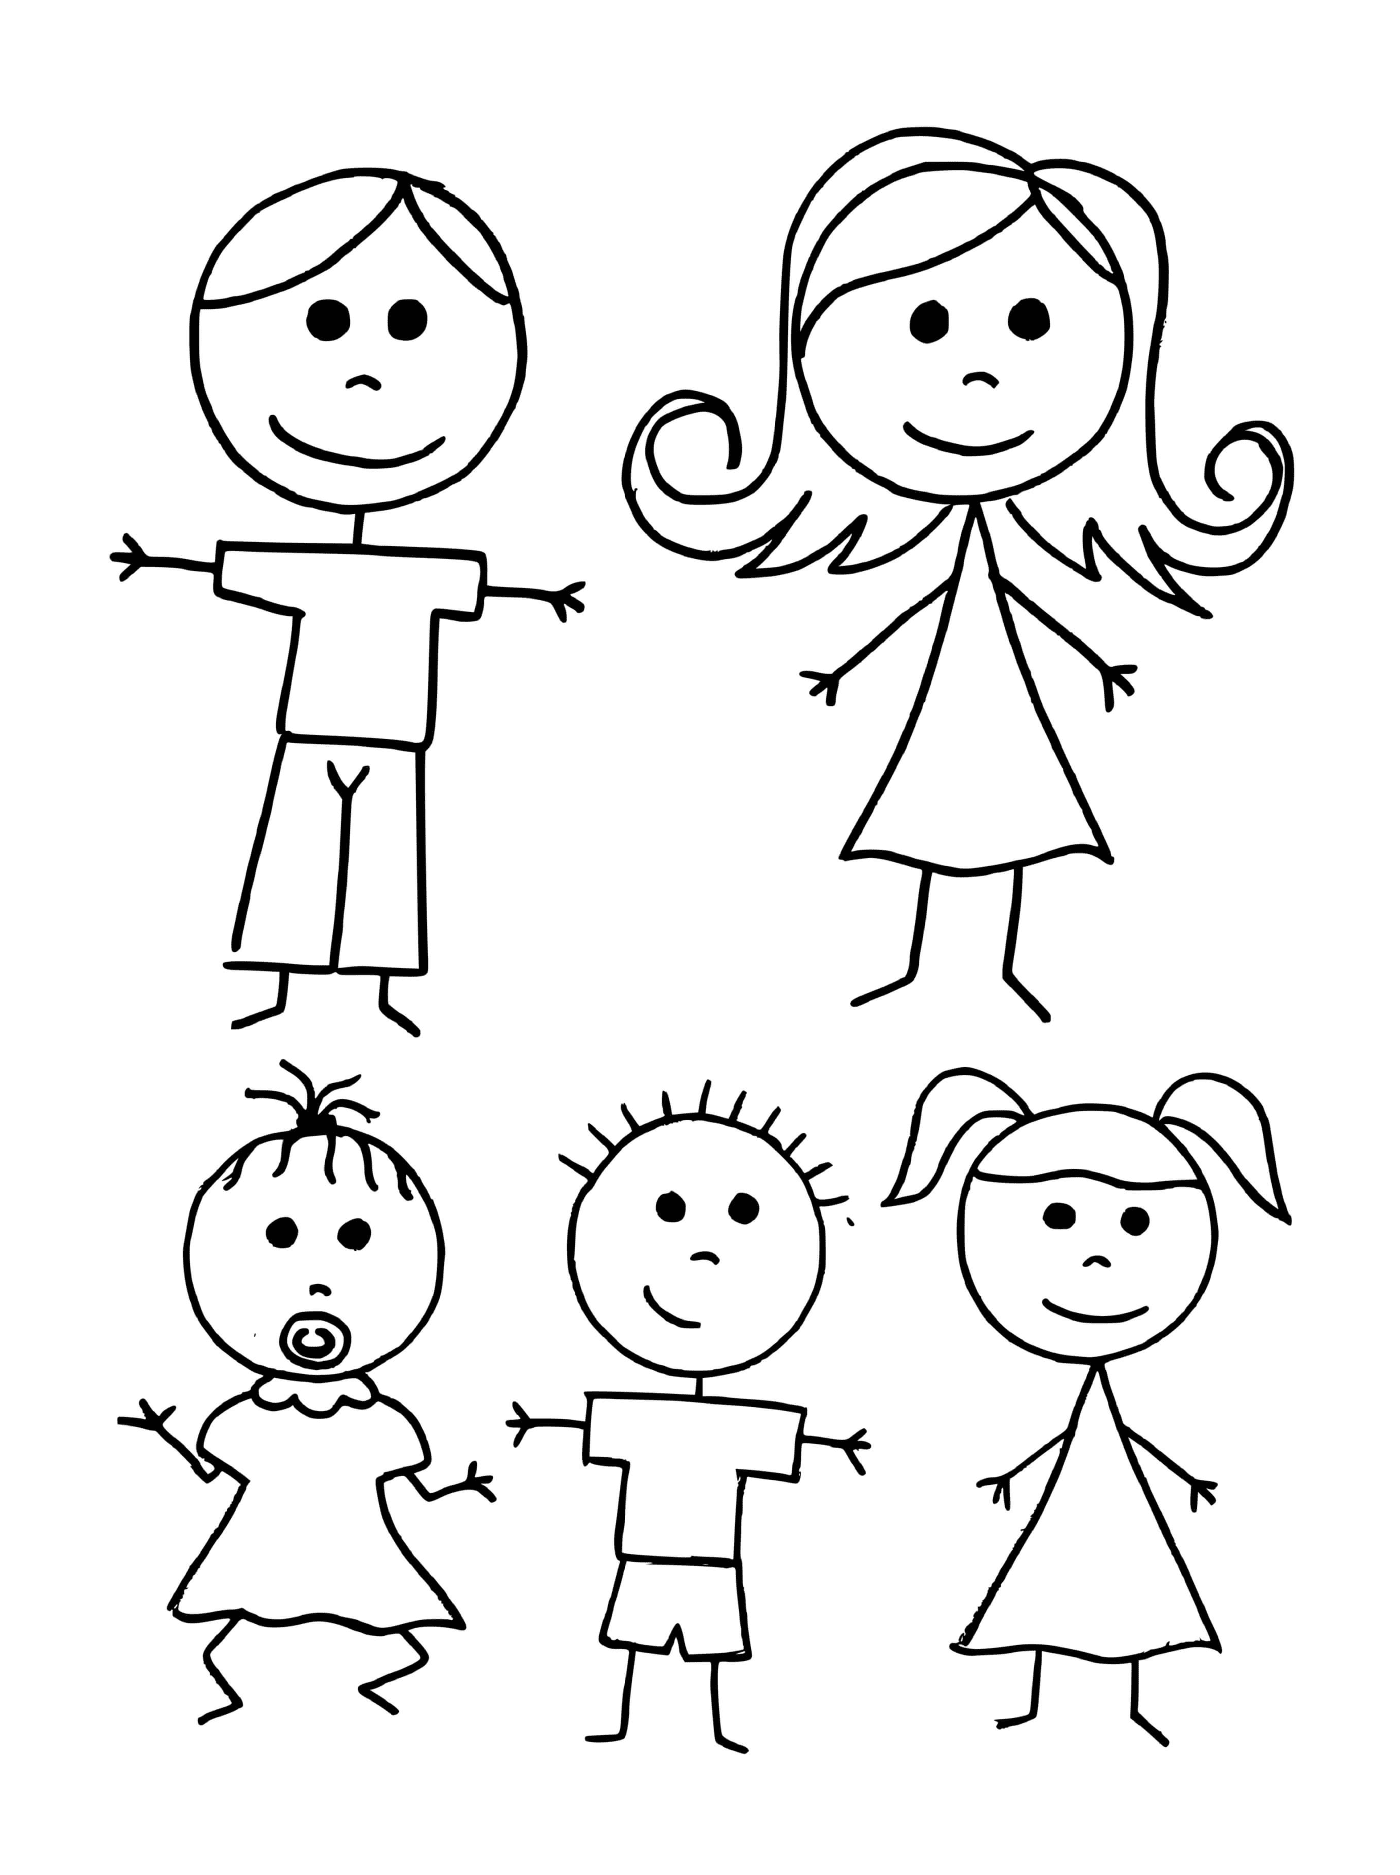  A group of children with drawn faces 